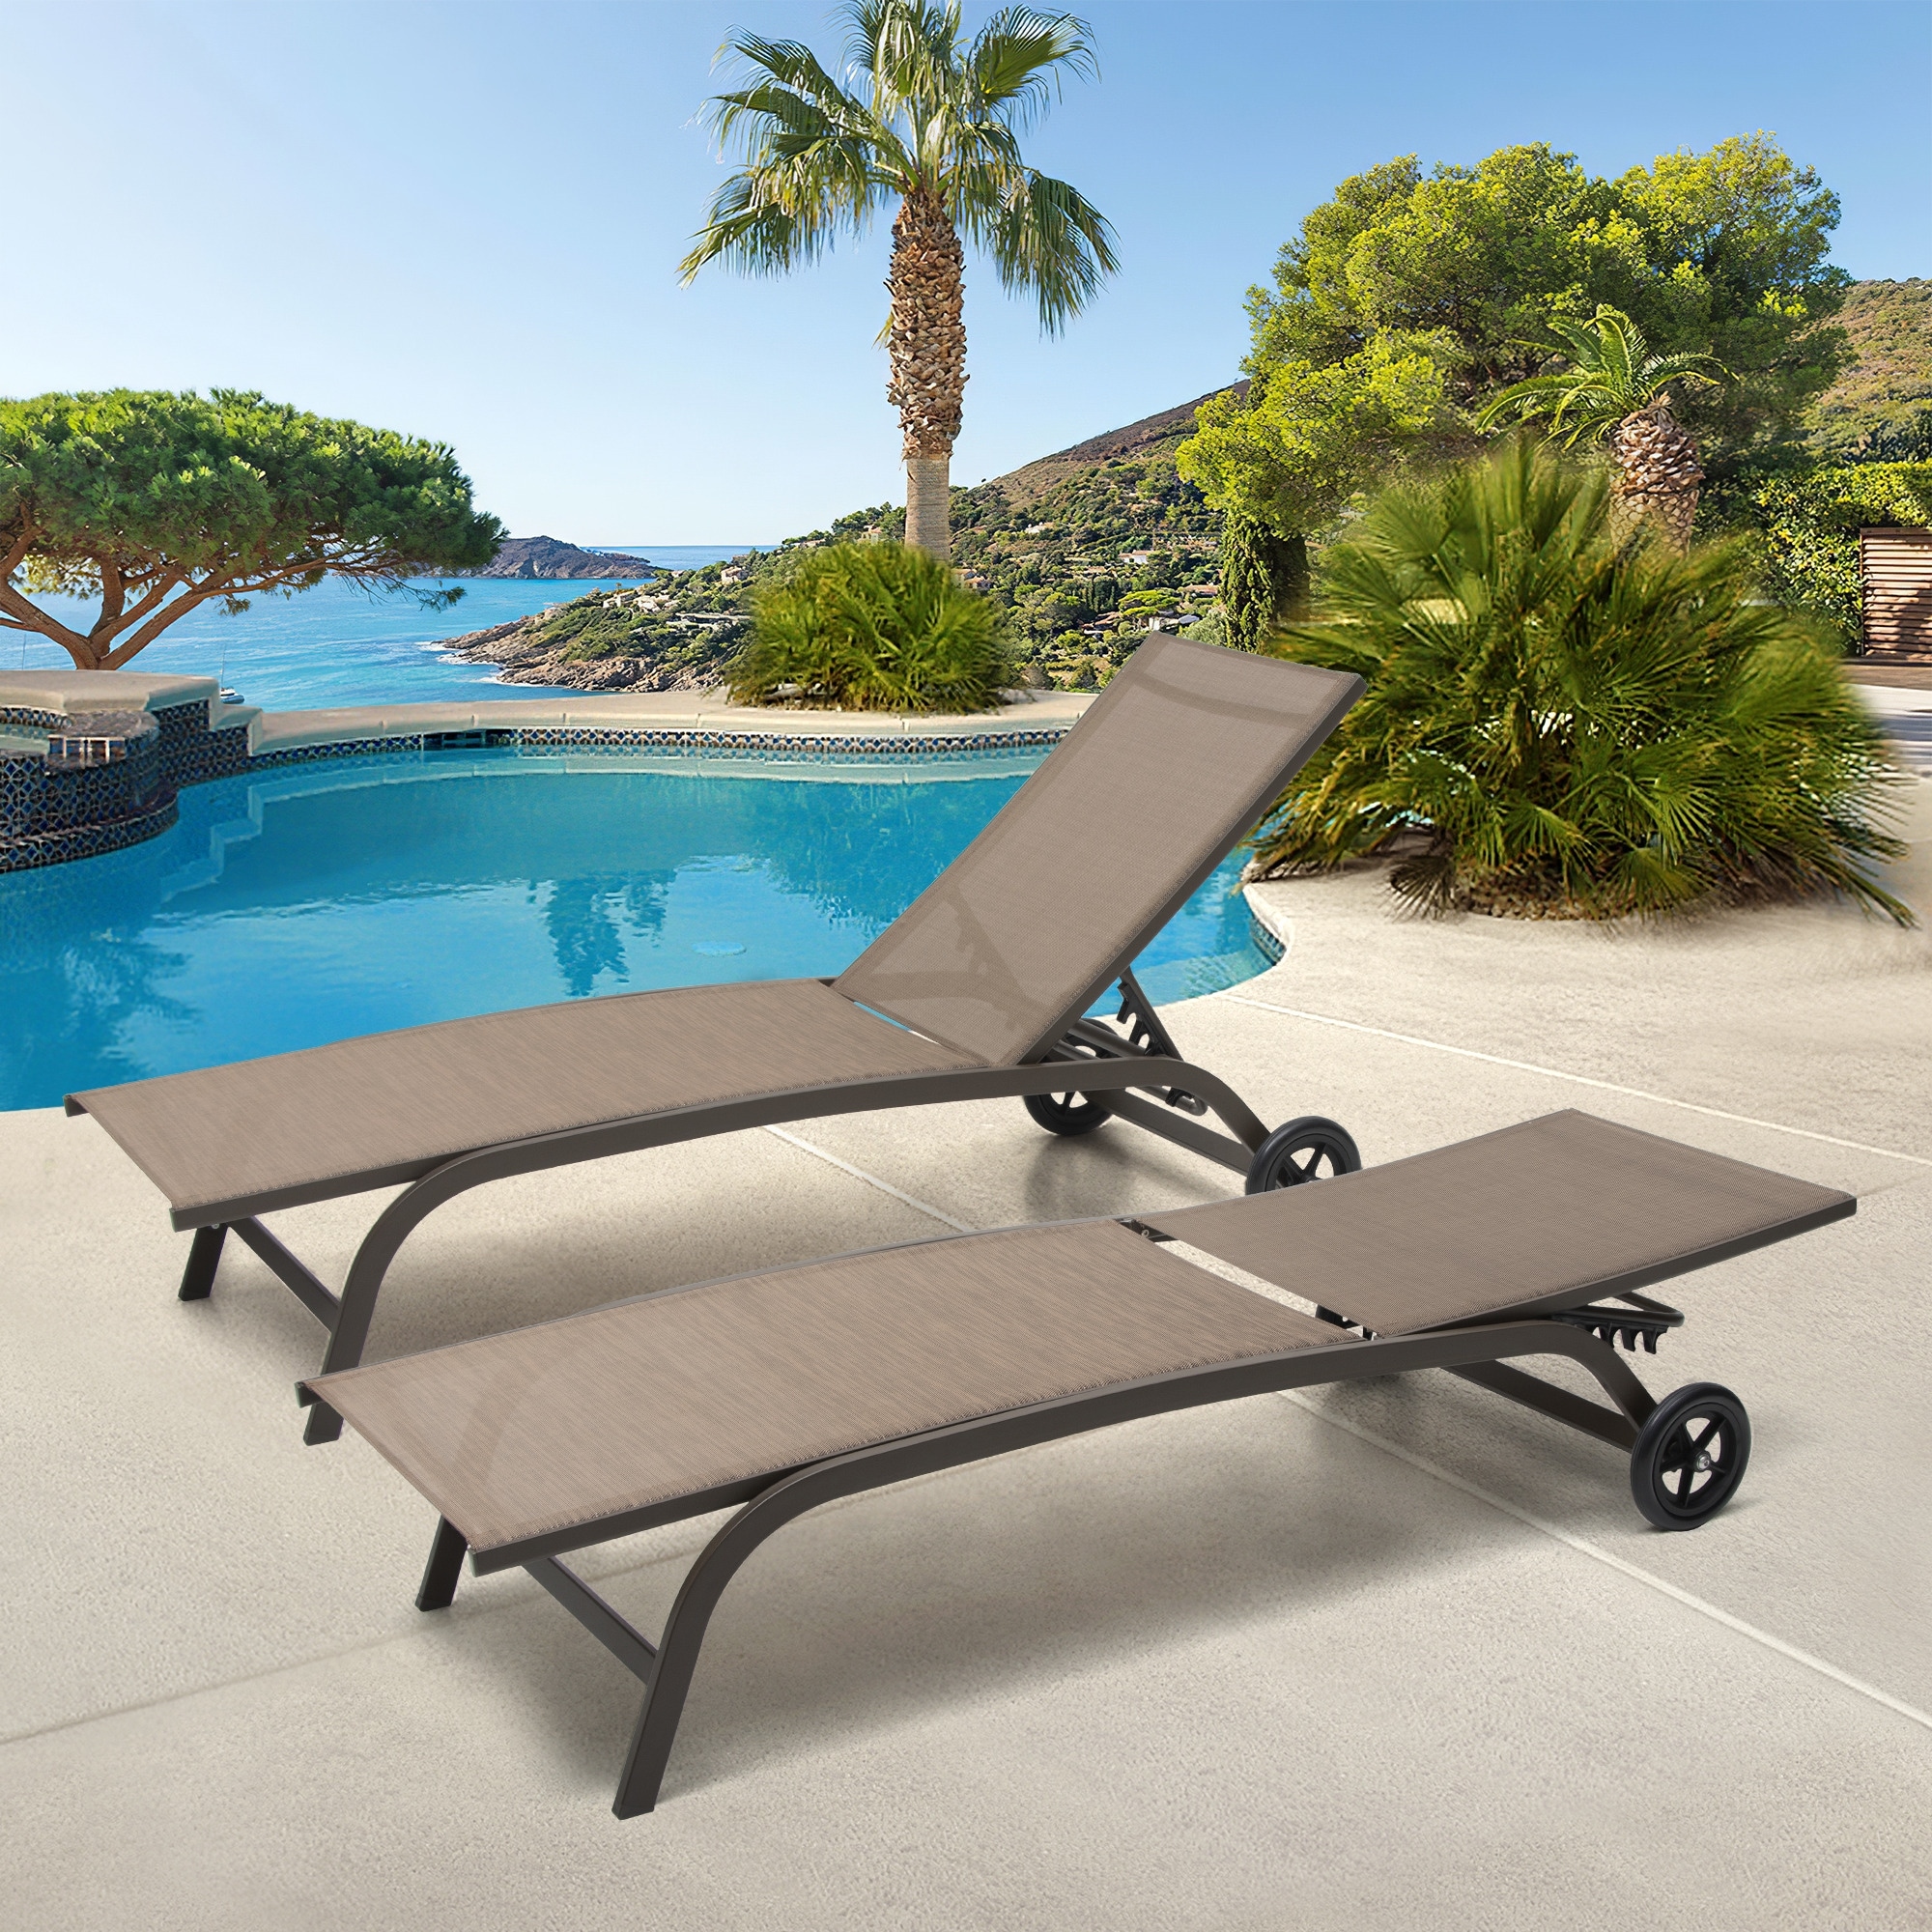 Pellebant 2pcs Full Flat Outdoor Chaise Lounge Chair With Wheels - N/a